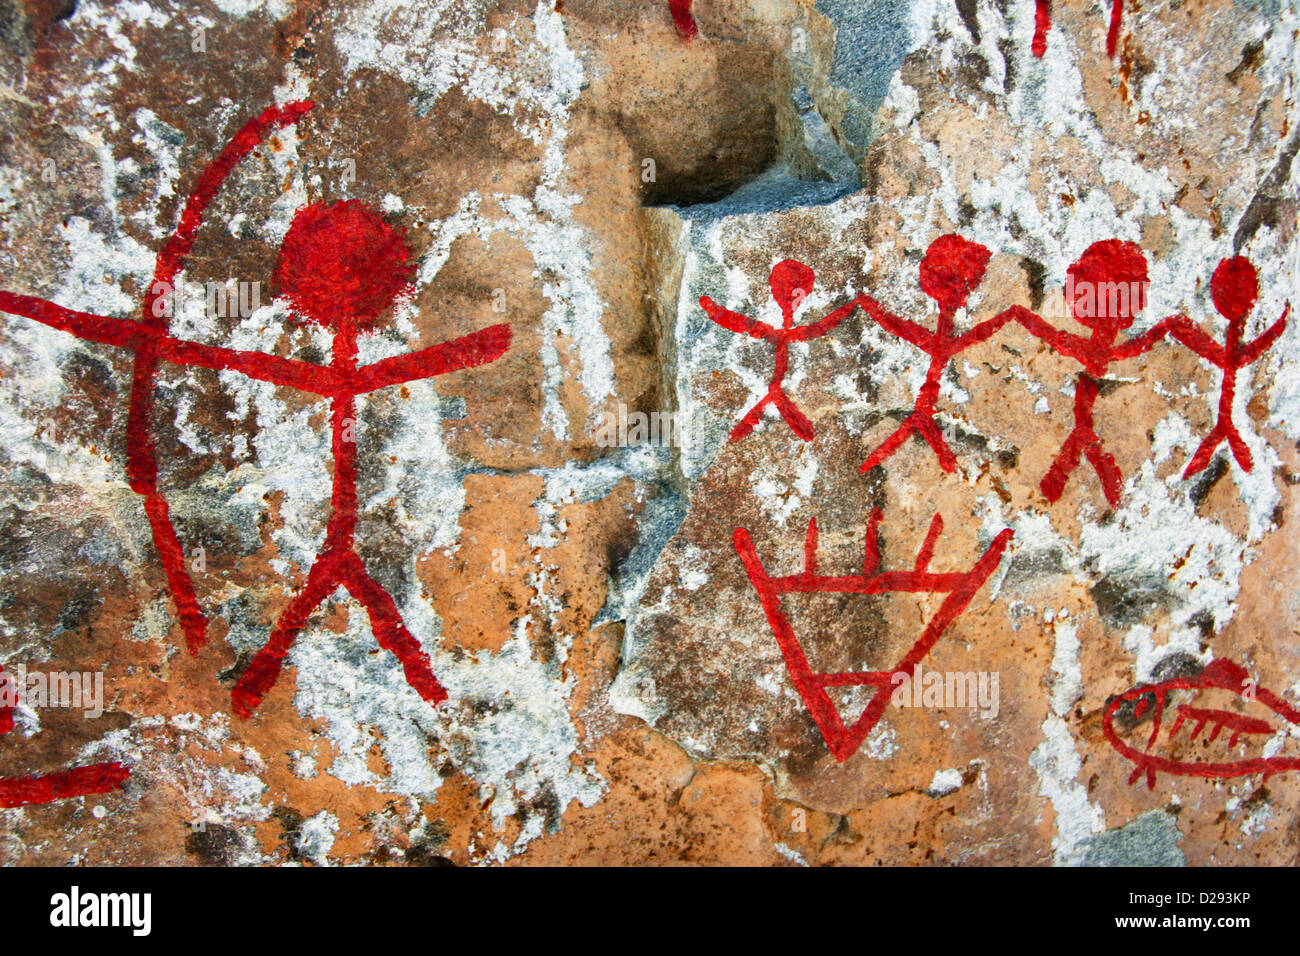 Squamish Lil'Wat Cultural Centre In Whistler, Reproduction Of Pictographs, B.C., Canada Stock Photo